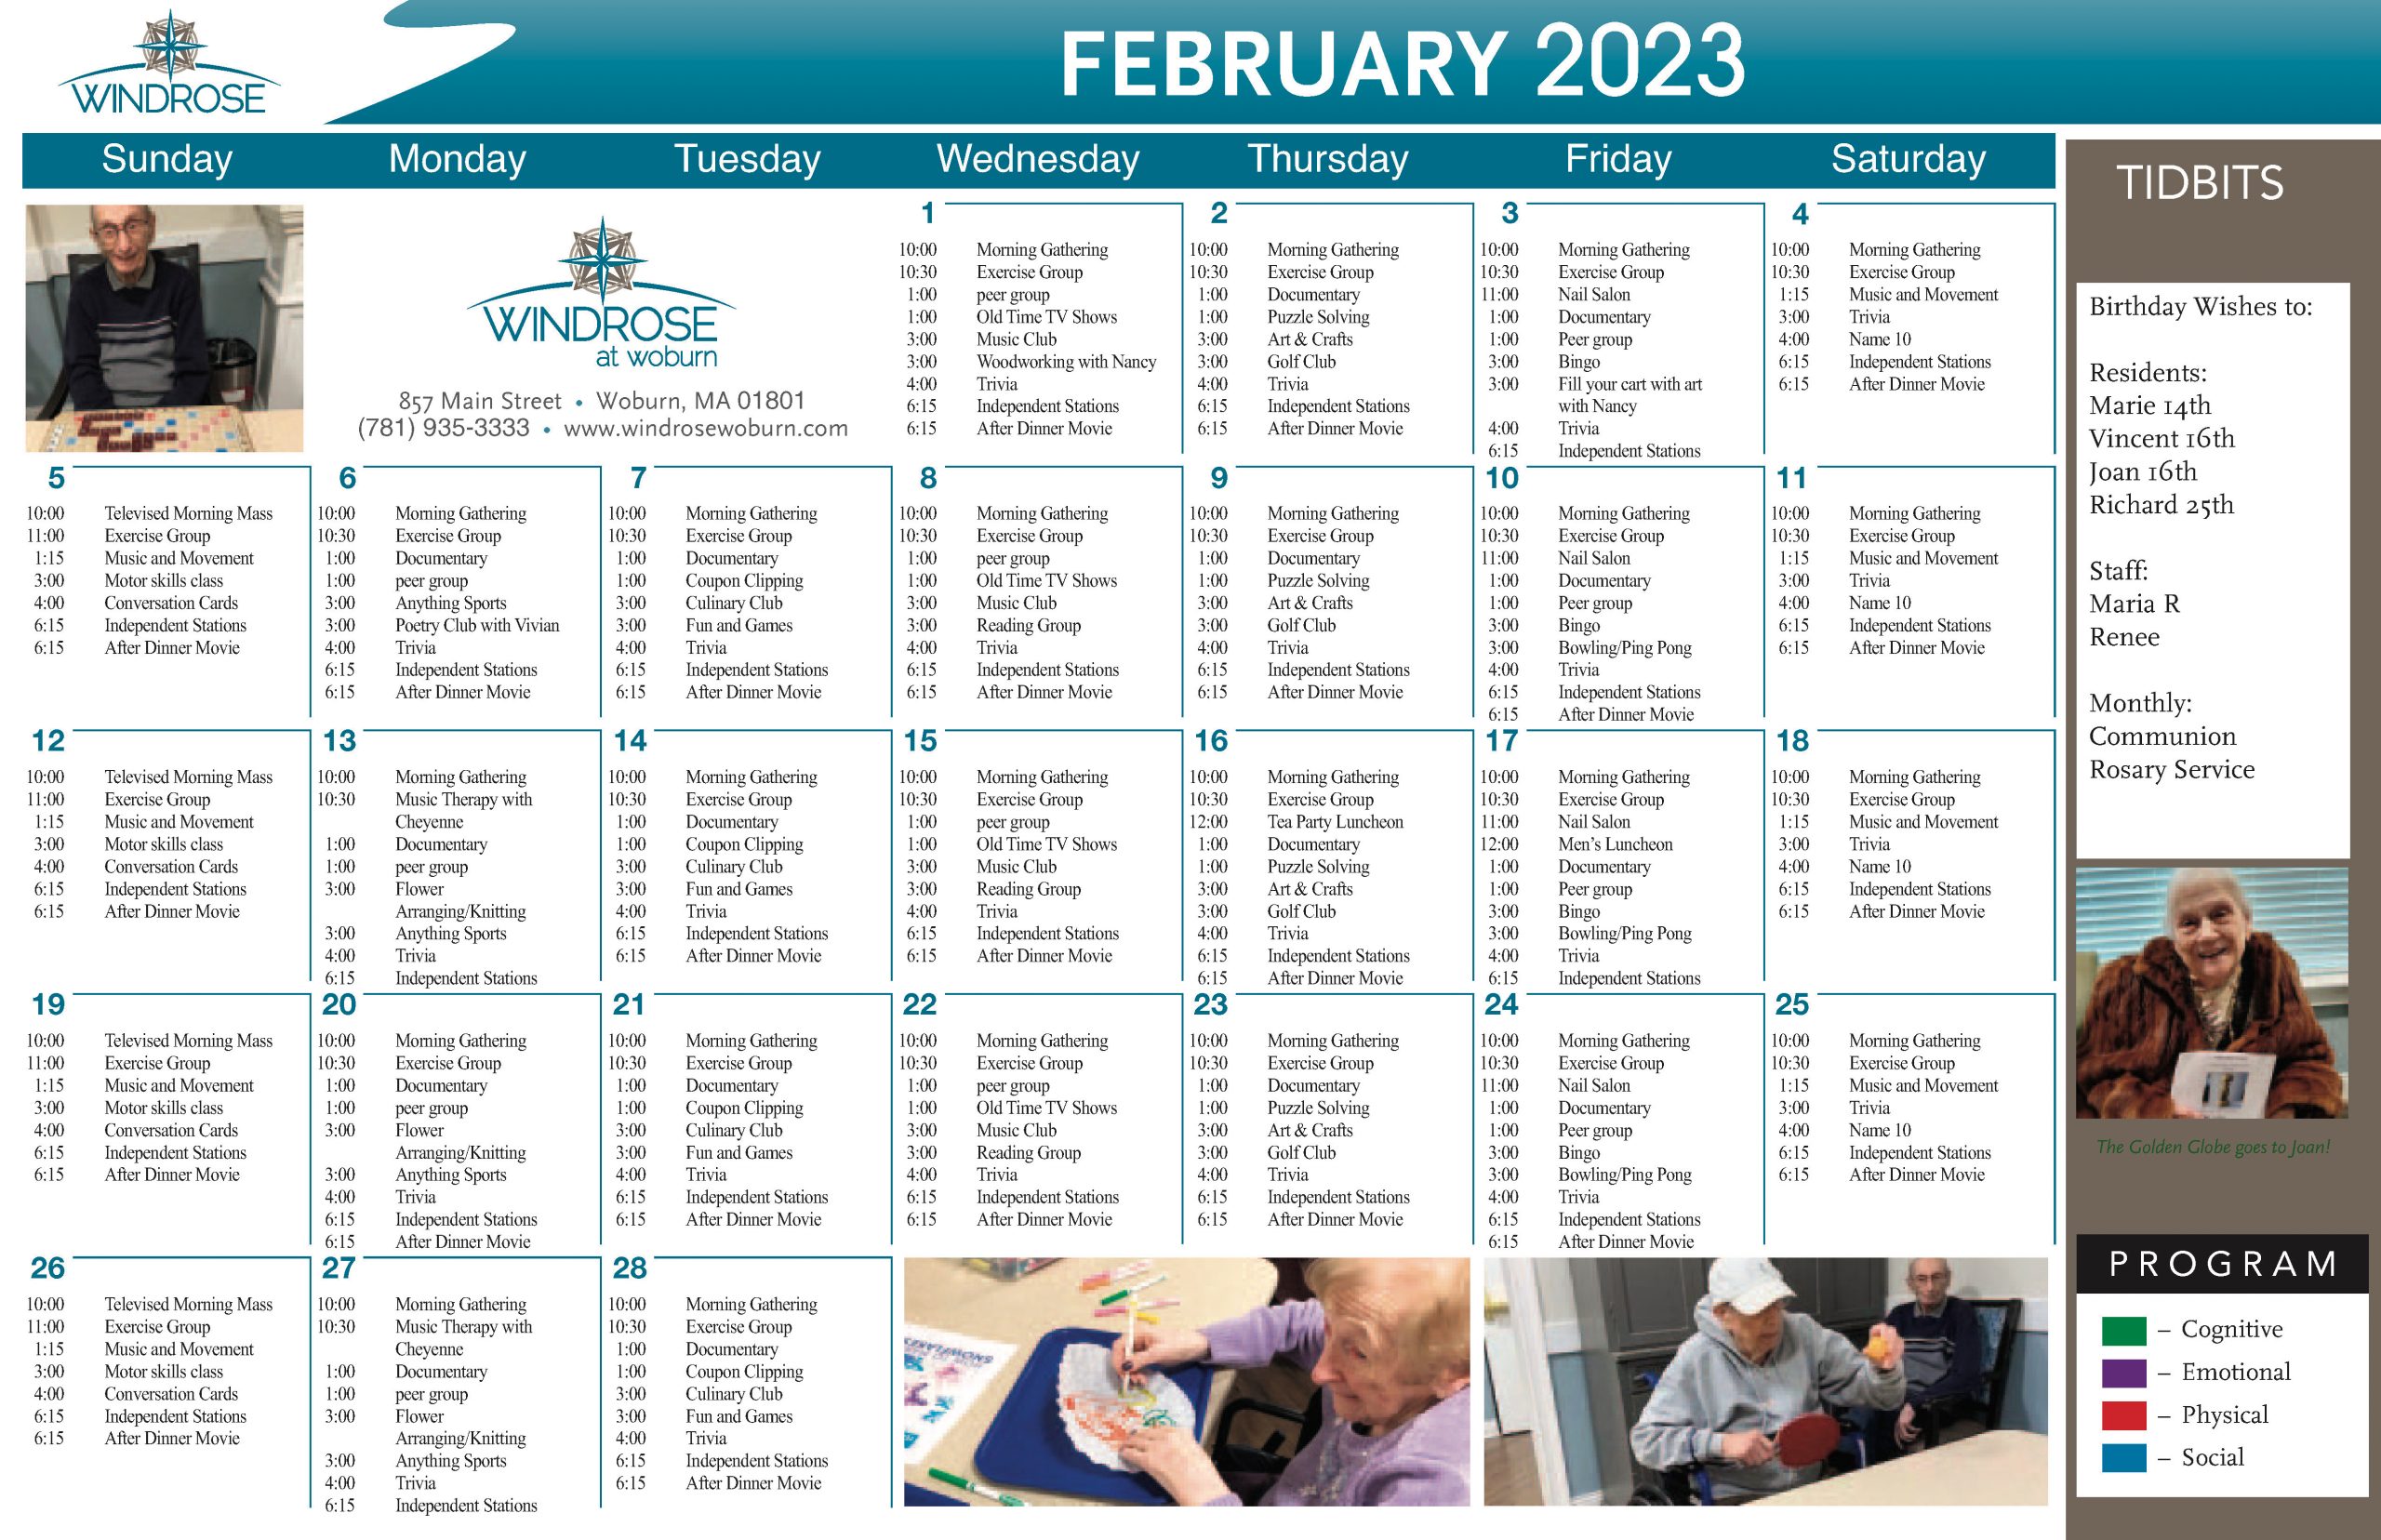 Assisted Living Community Activities Calendar February 2023